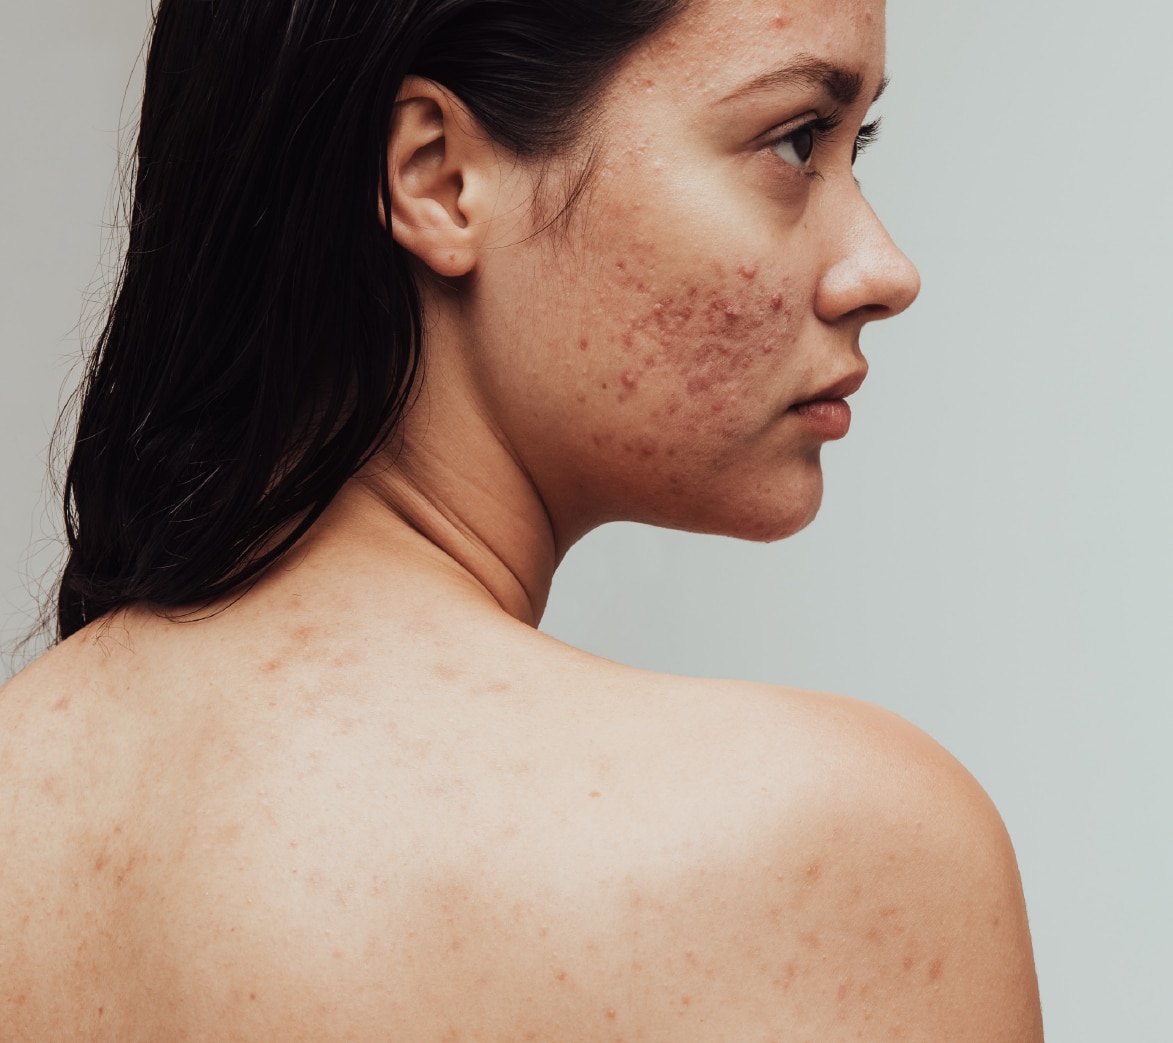 Acne Scarring Treatment Liverpool